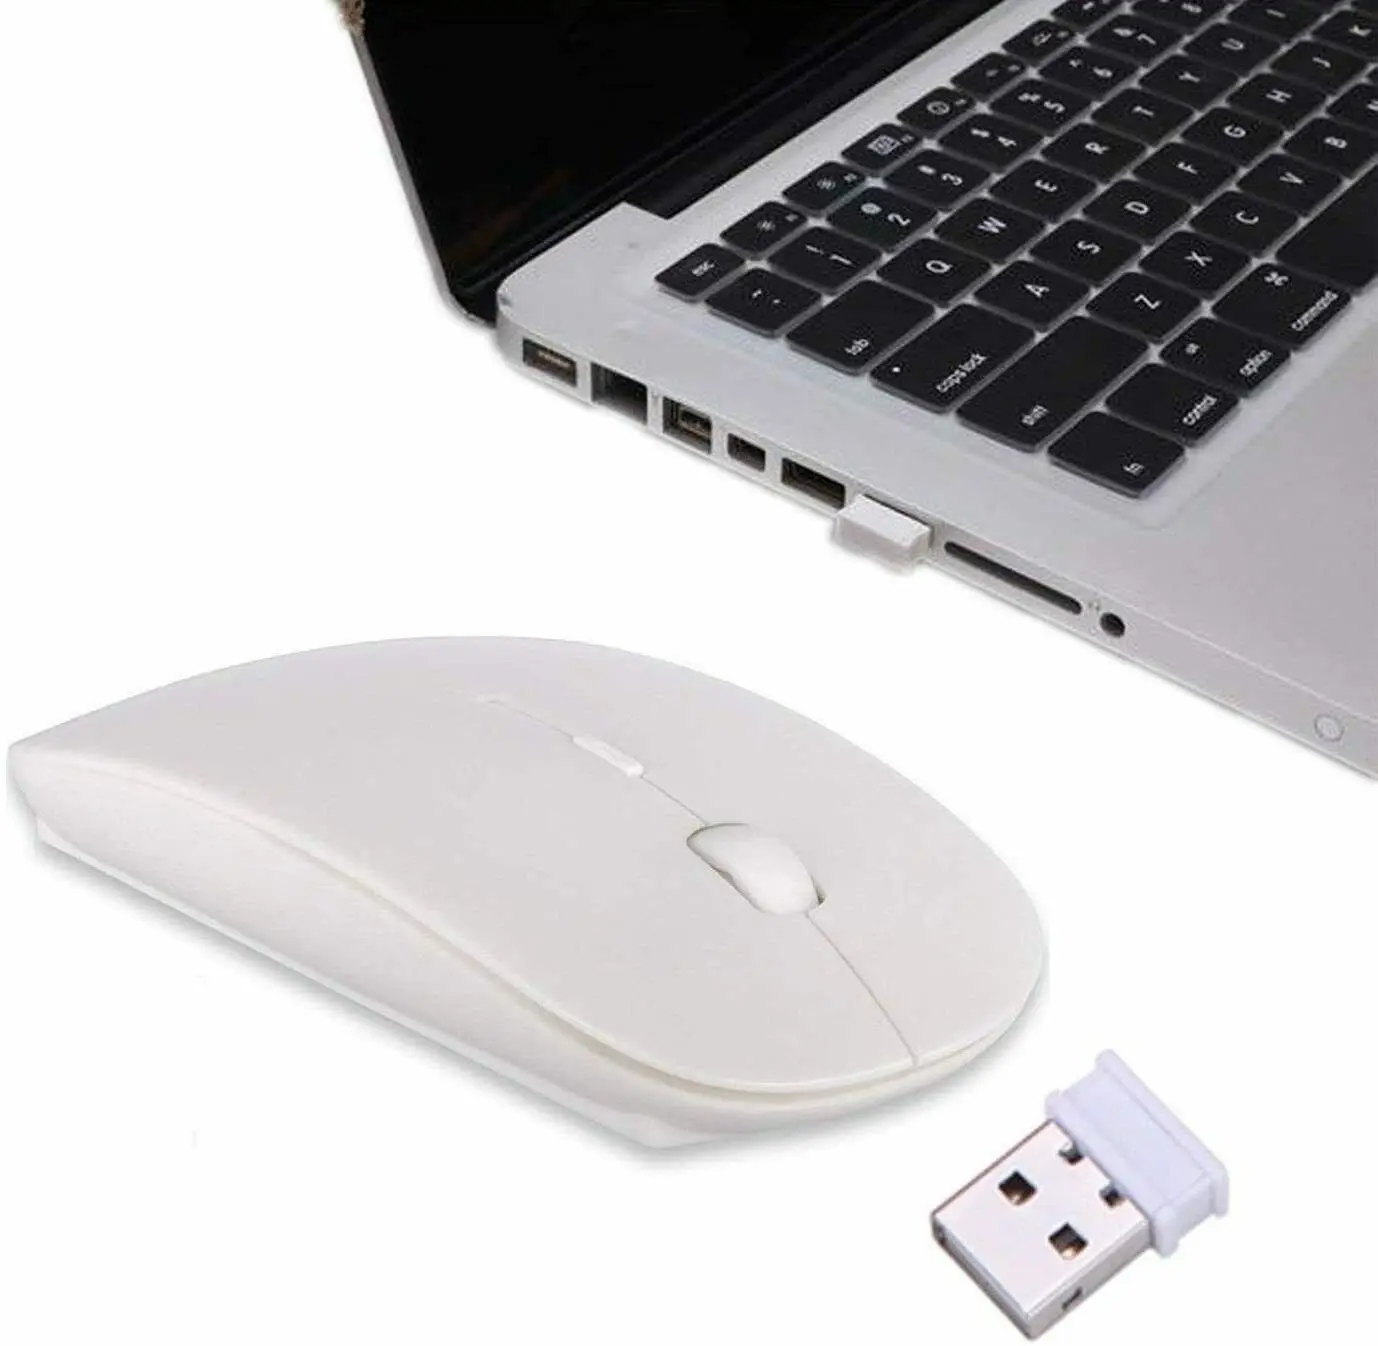 2.4 GHz Wireless Cordless Mouse Mice Optical Scroll USB Scroll Mice For Pc Laptop Computer